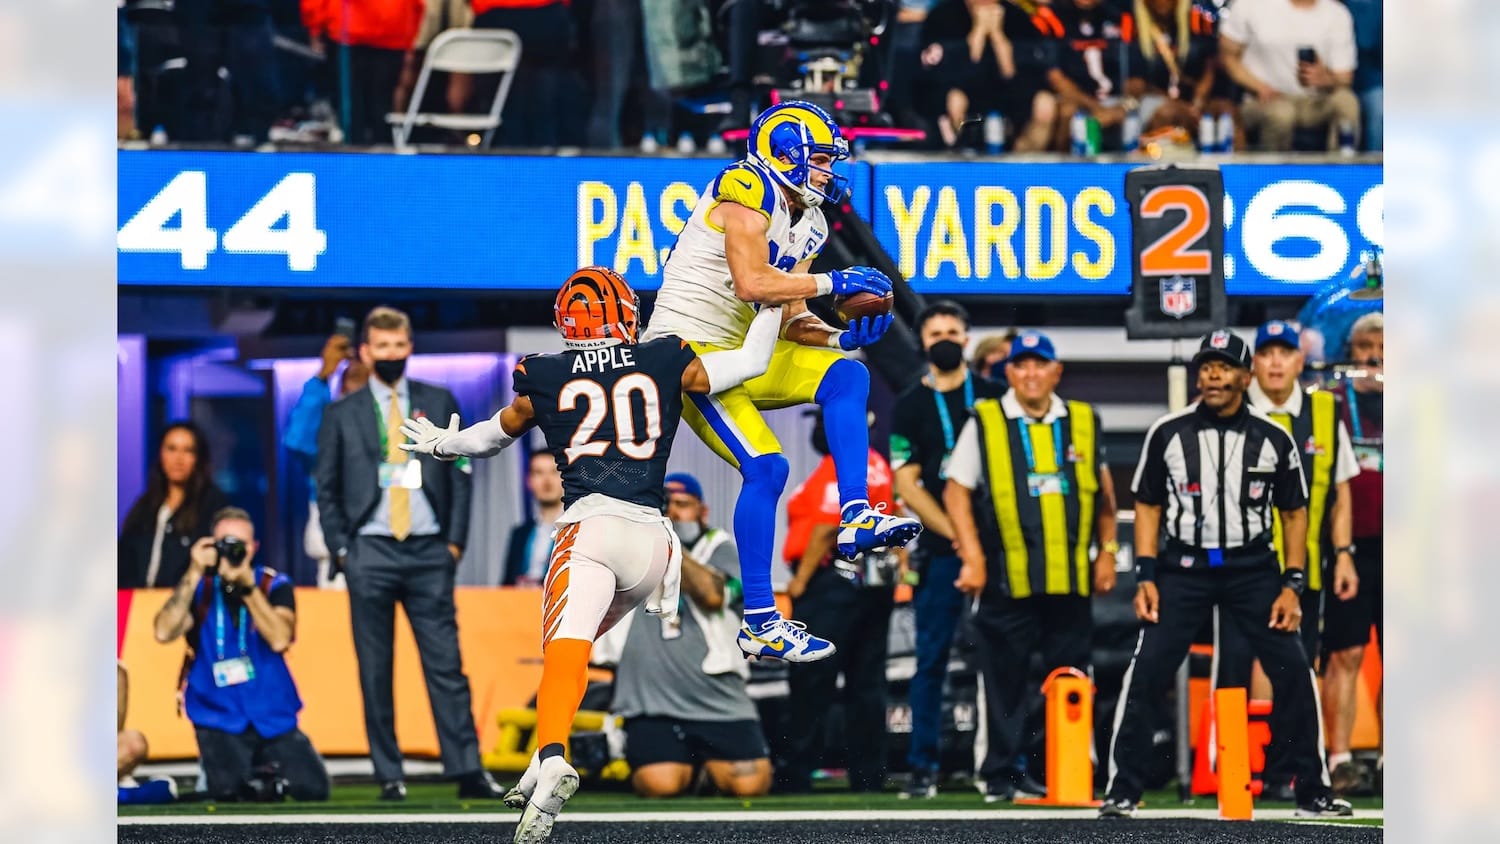 Cooper Kupp Saves The Day And Wins Super Bowl MVP